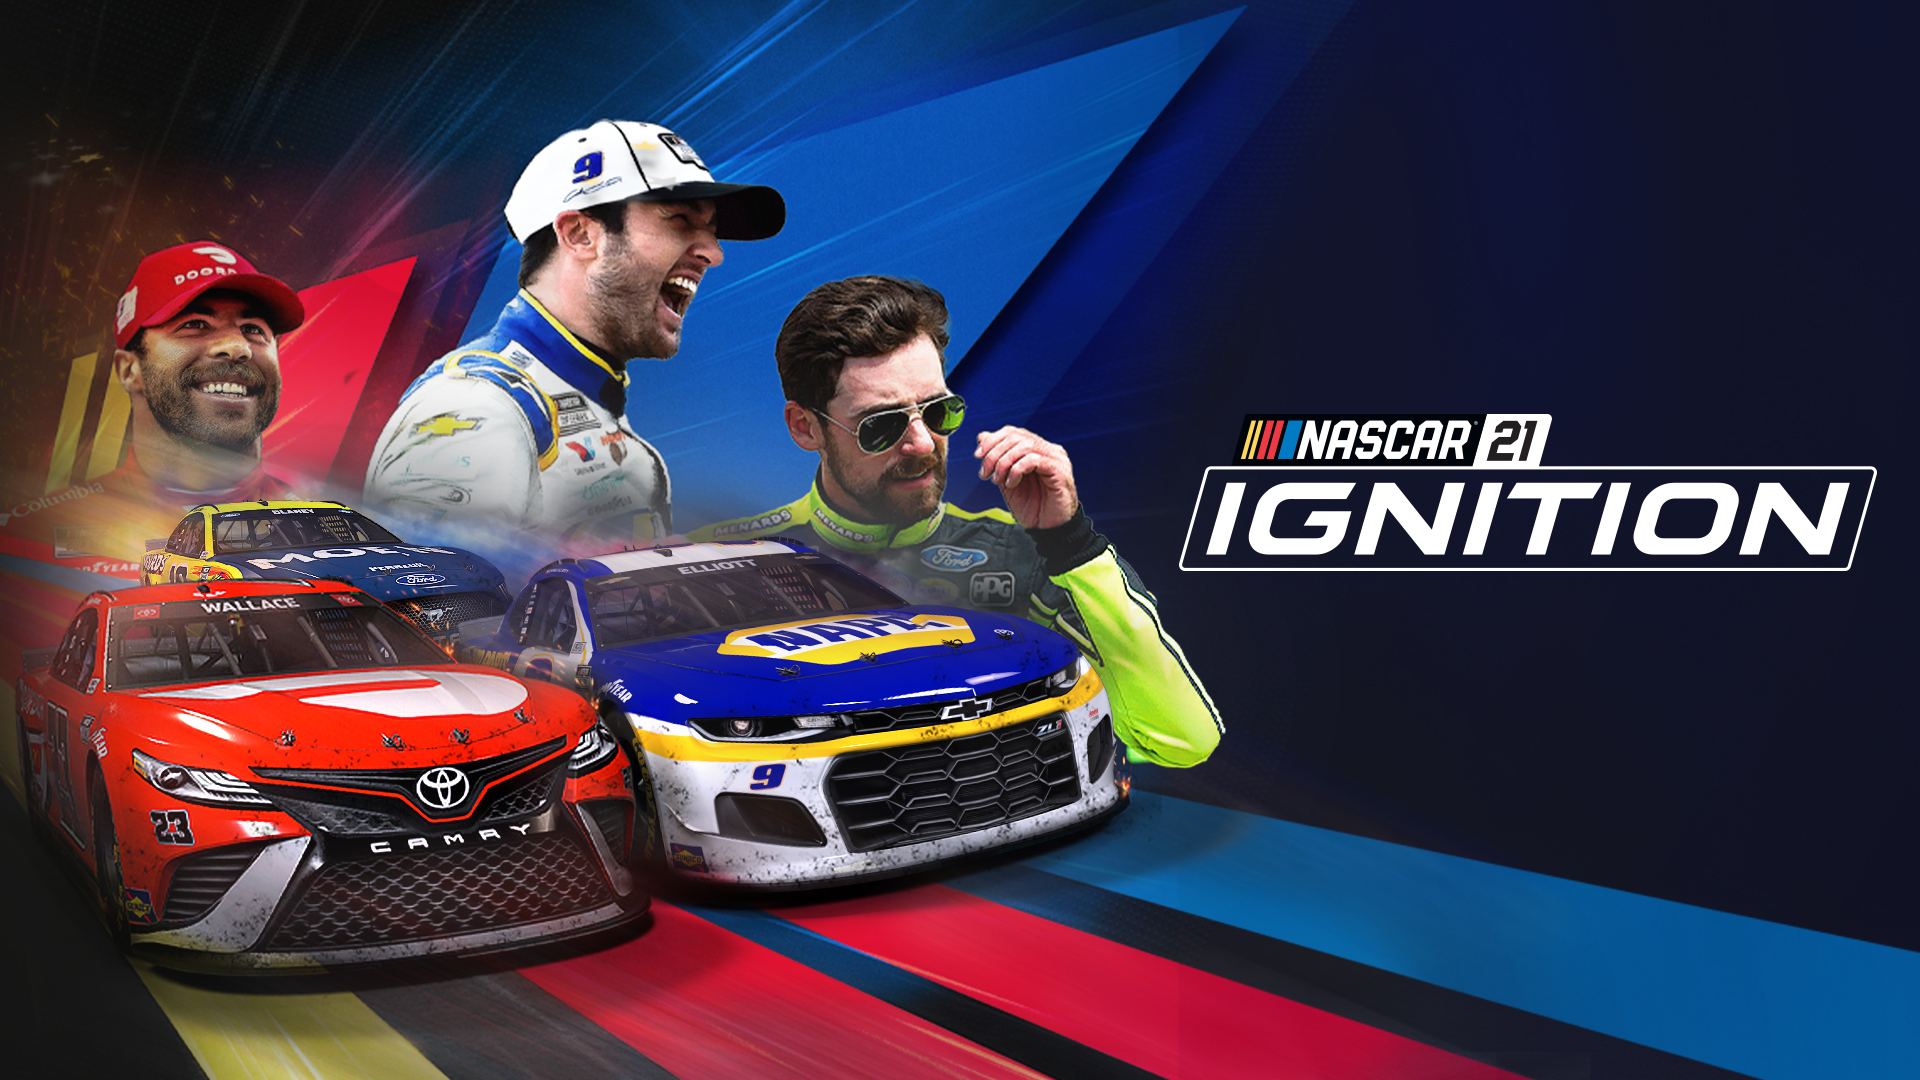 Now Available NASCAR 21 Ignition Officially Licensed by NASCAR